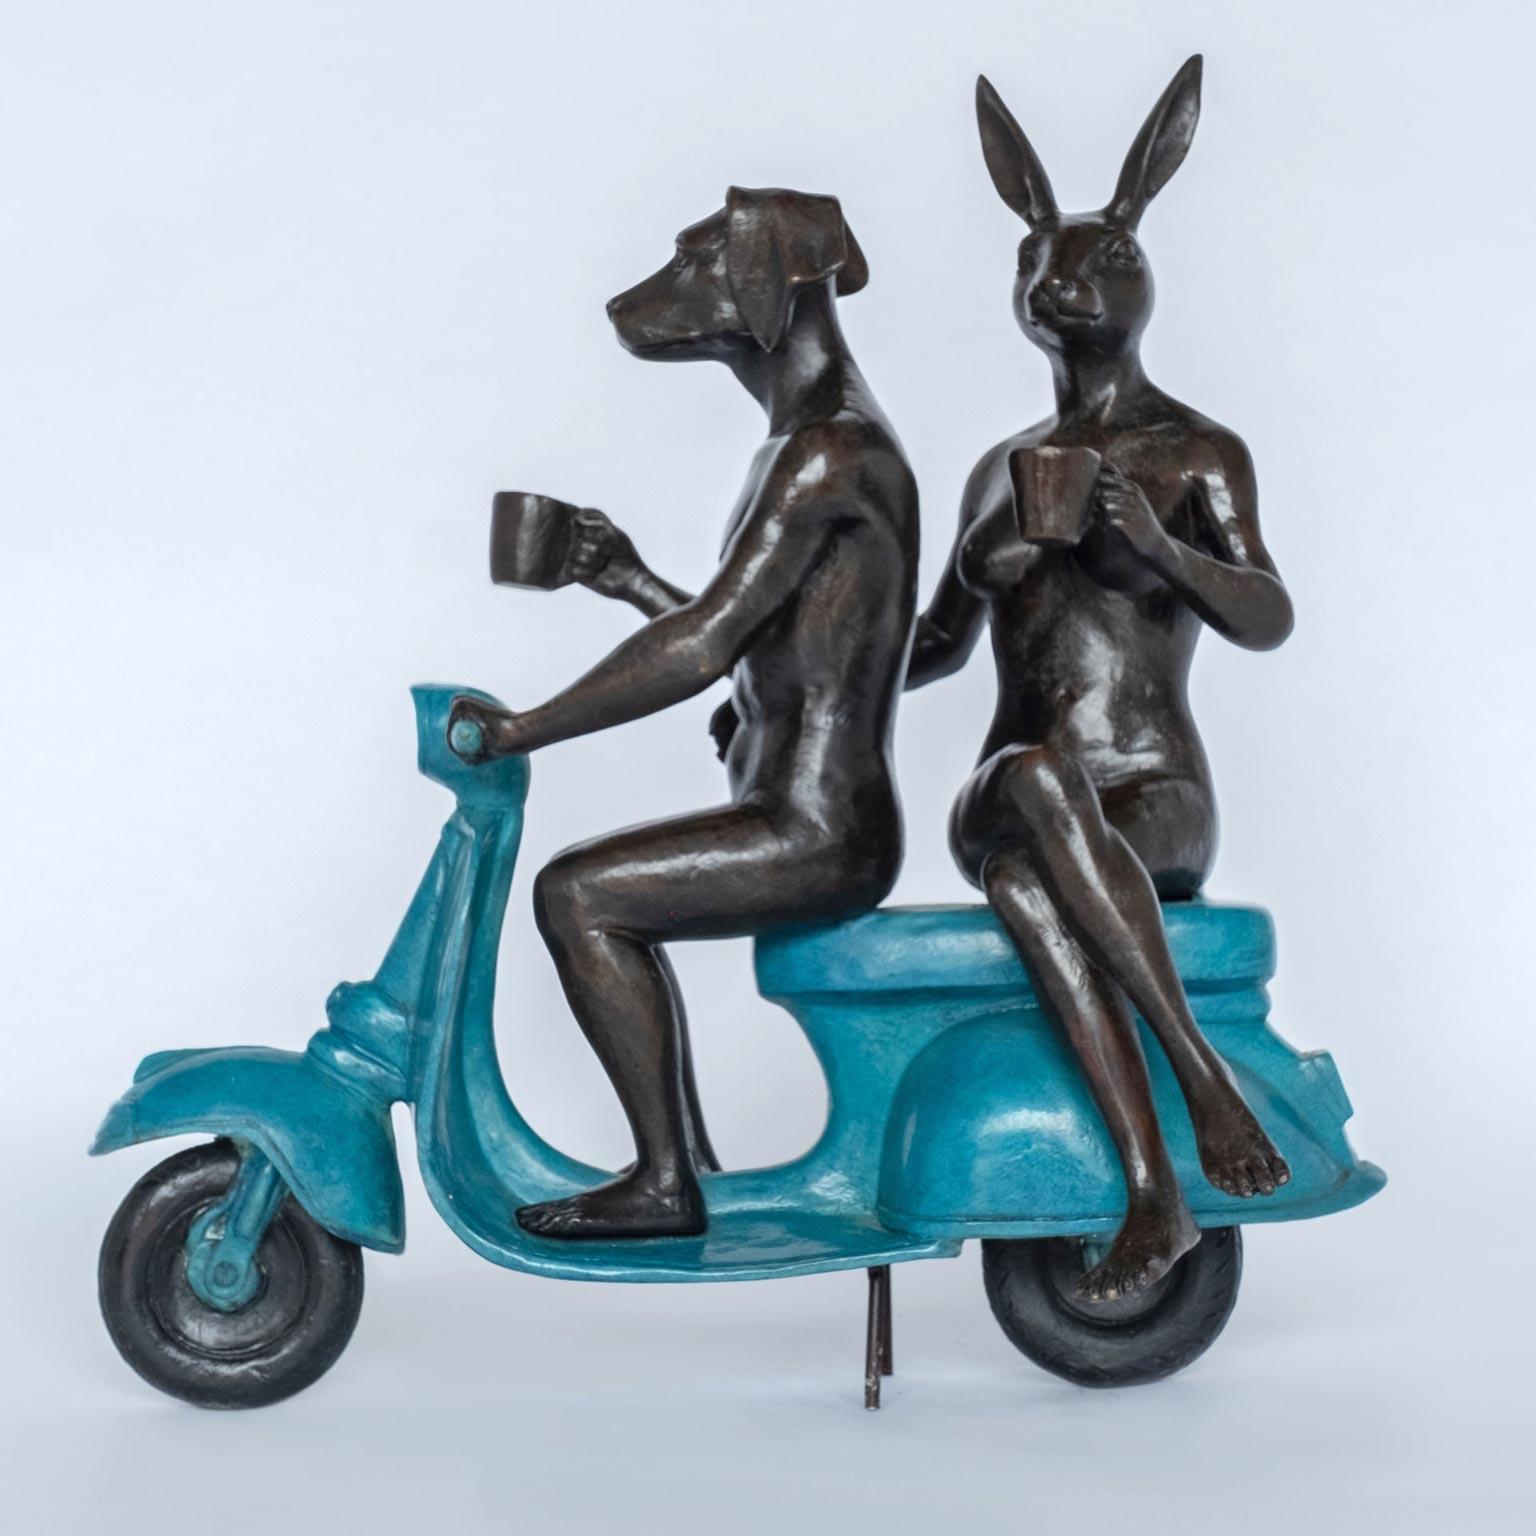 Title: They loved coffee, riding and each other
Authentic bronze sculpture
Limited Edition

World Famous Contemporary Artists: Husband and wife team, Gillie and Marc, are New York and Sydney-based contemporary artists who collaborate to create